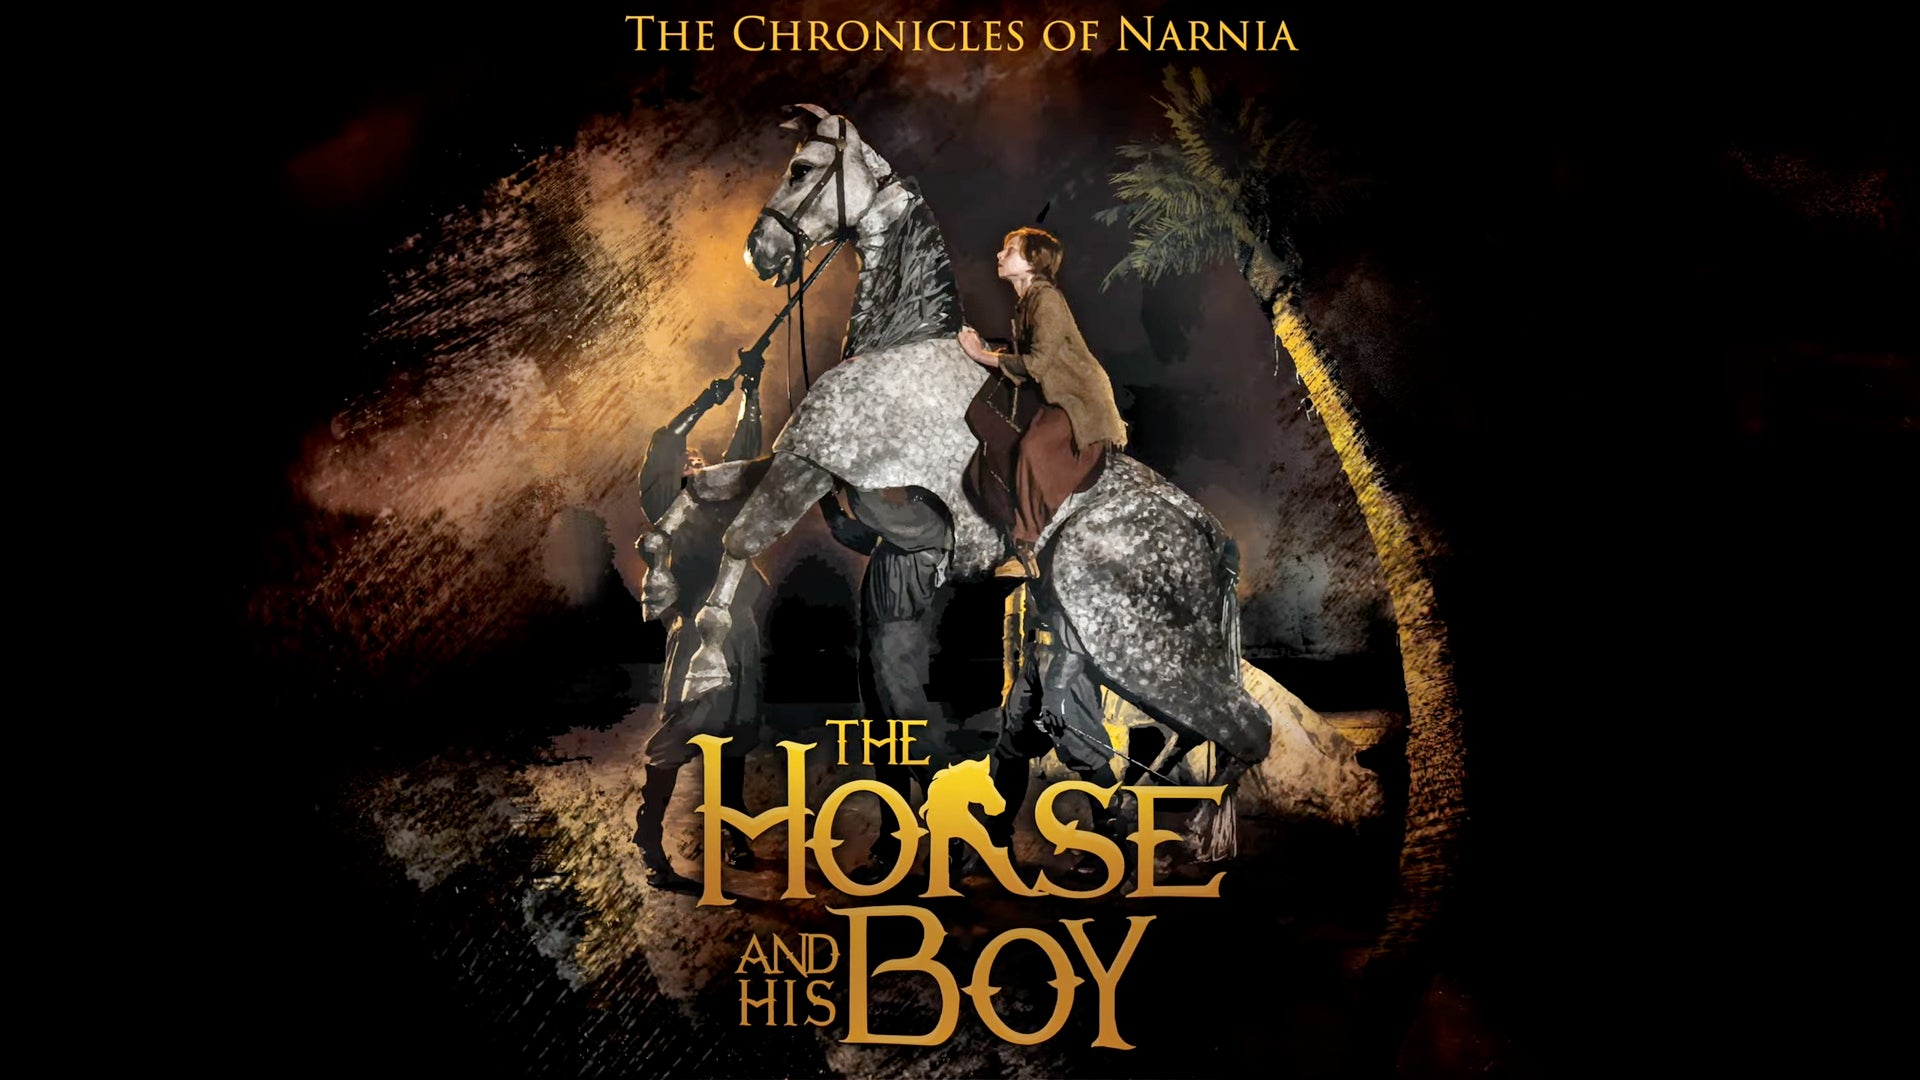 Aslan in 'A Horse and His Boy